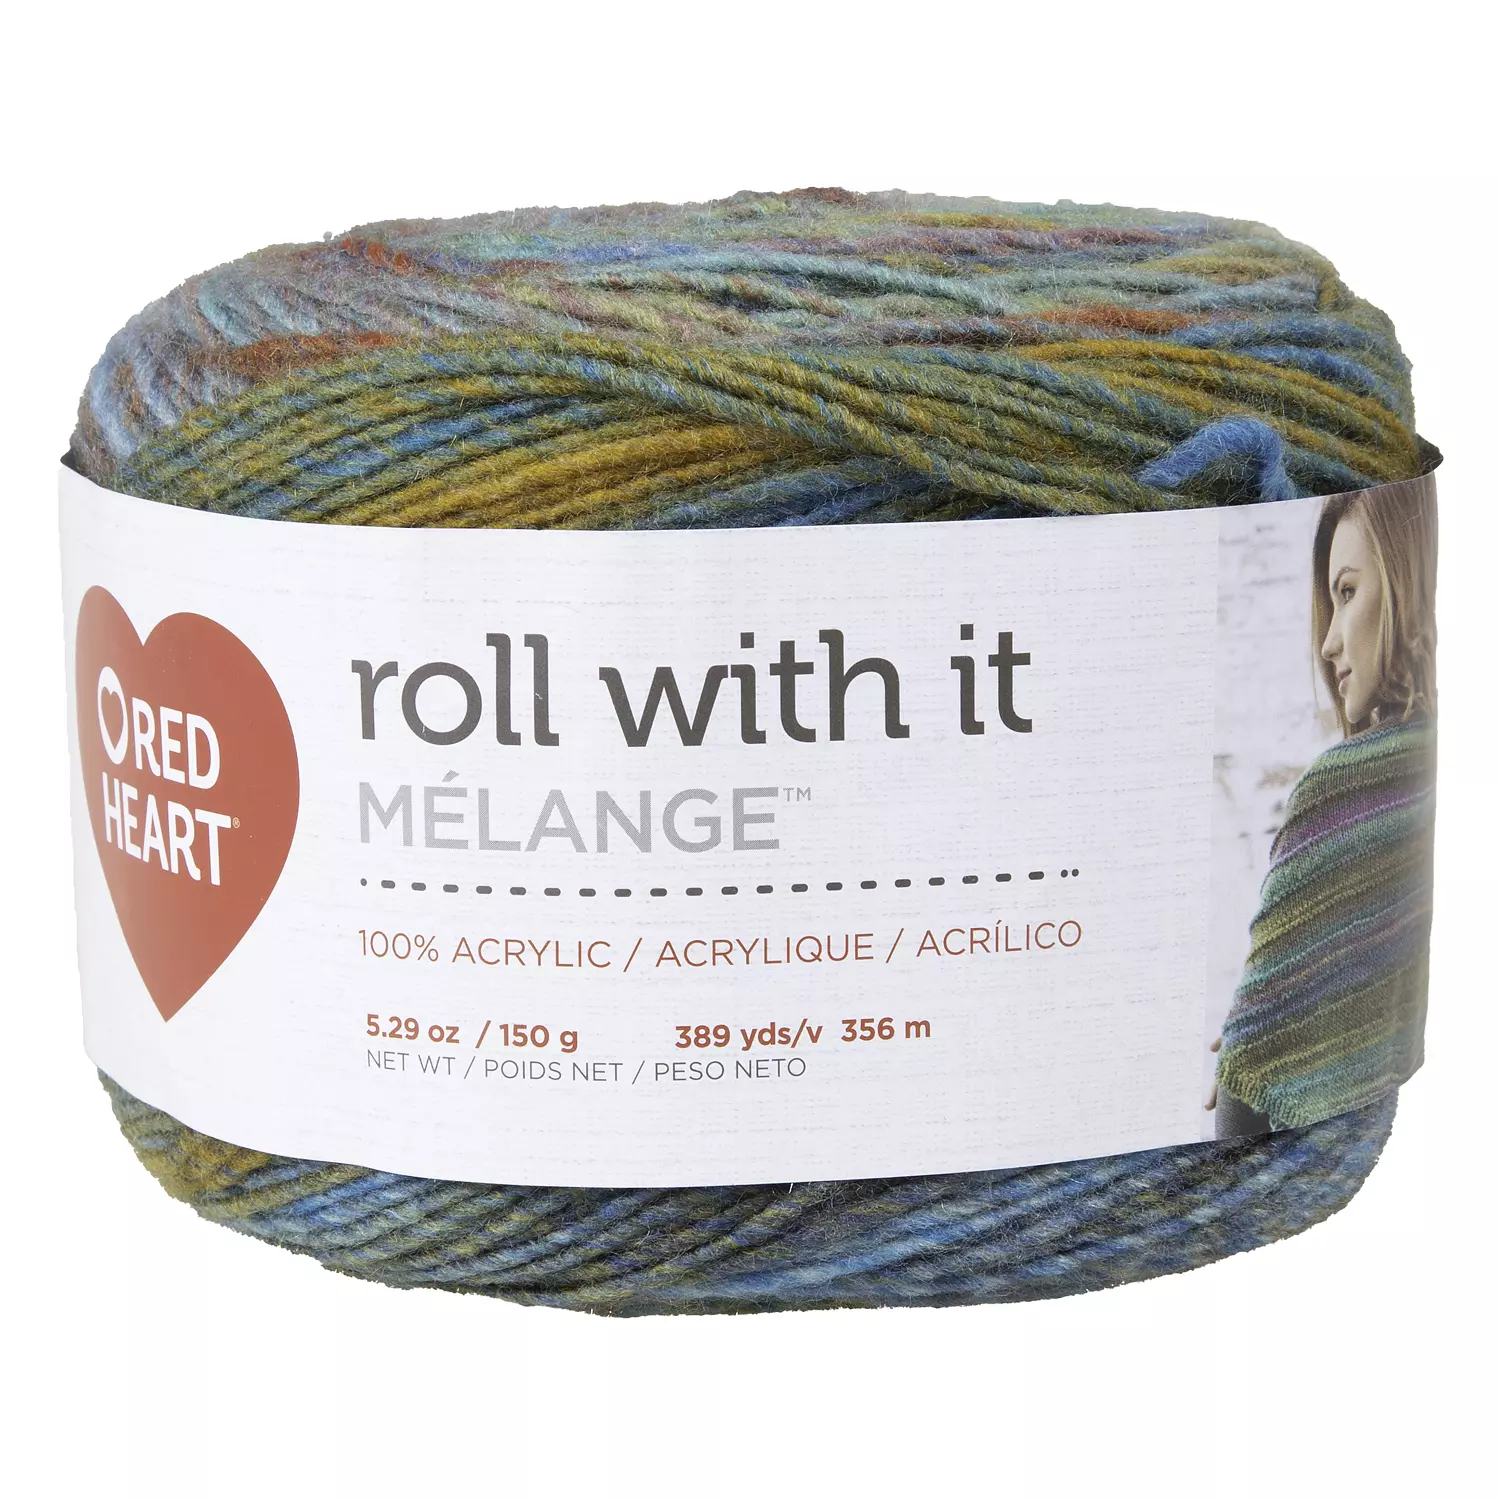 Red Heart Roll With It Mélange - Yarn, paparazzi. Colour: multi